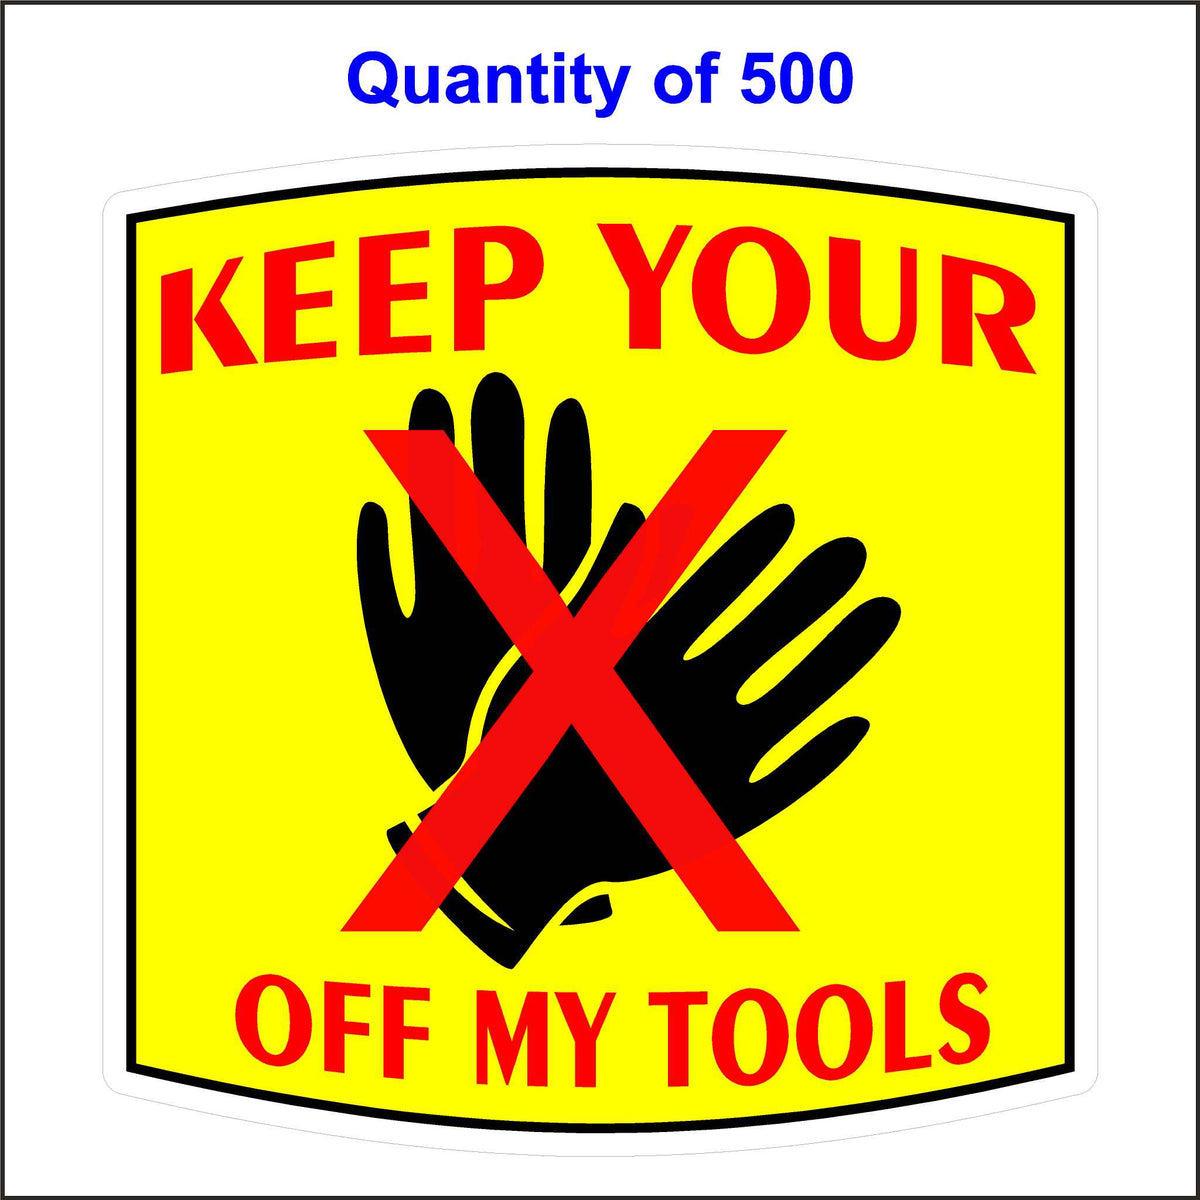 Keep Your Hands off My Tools Sticker. Yellow Background, Black Hands and Red Lettering. 500 Quantity.